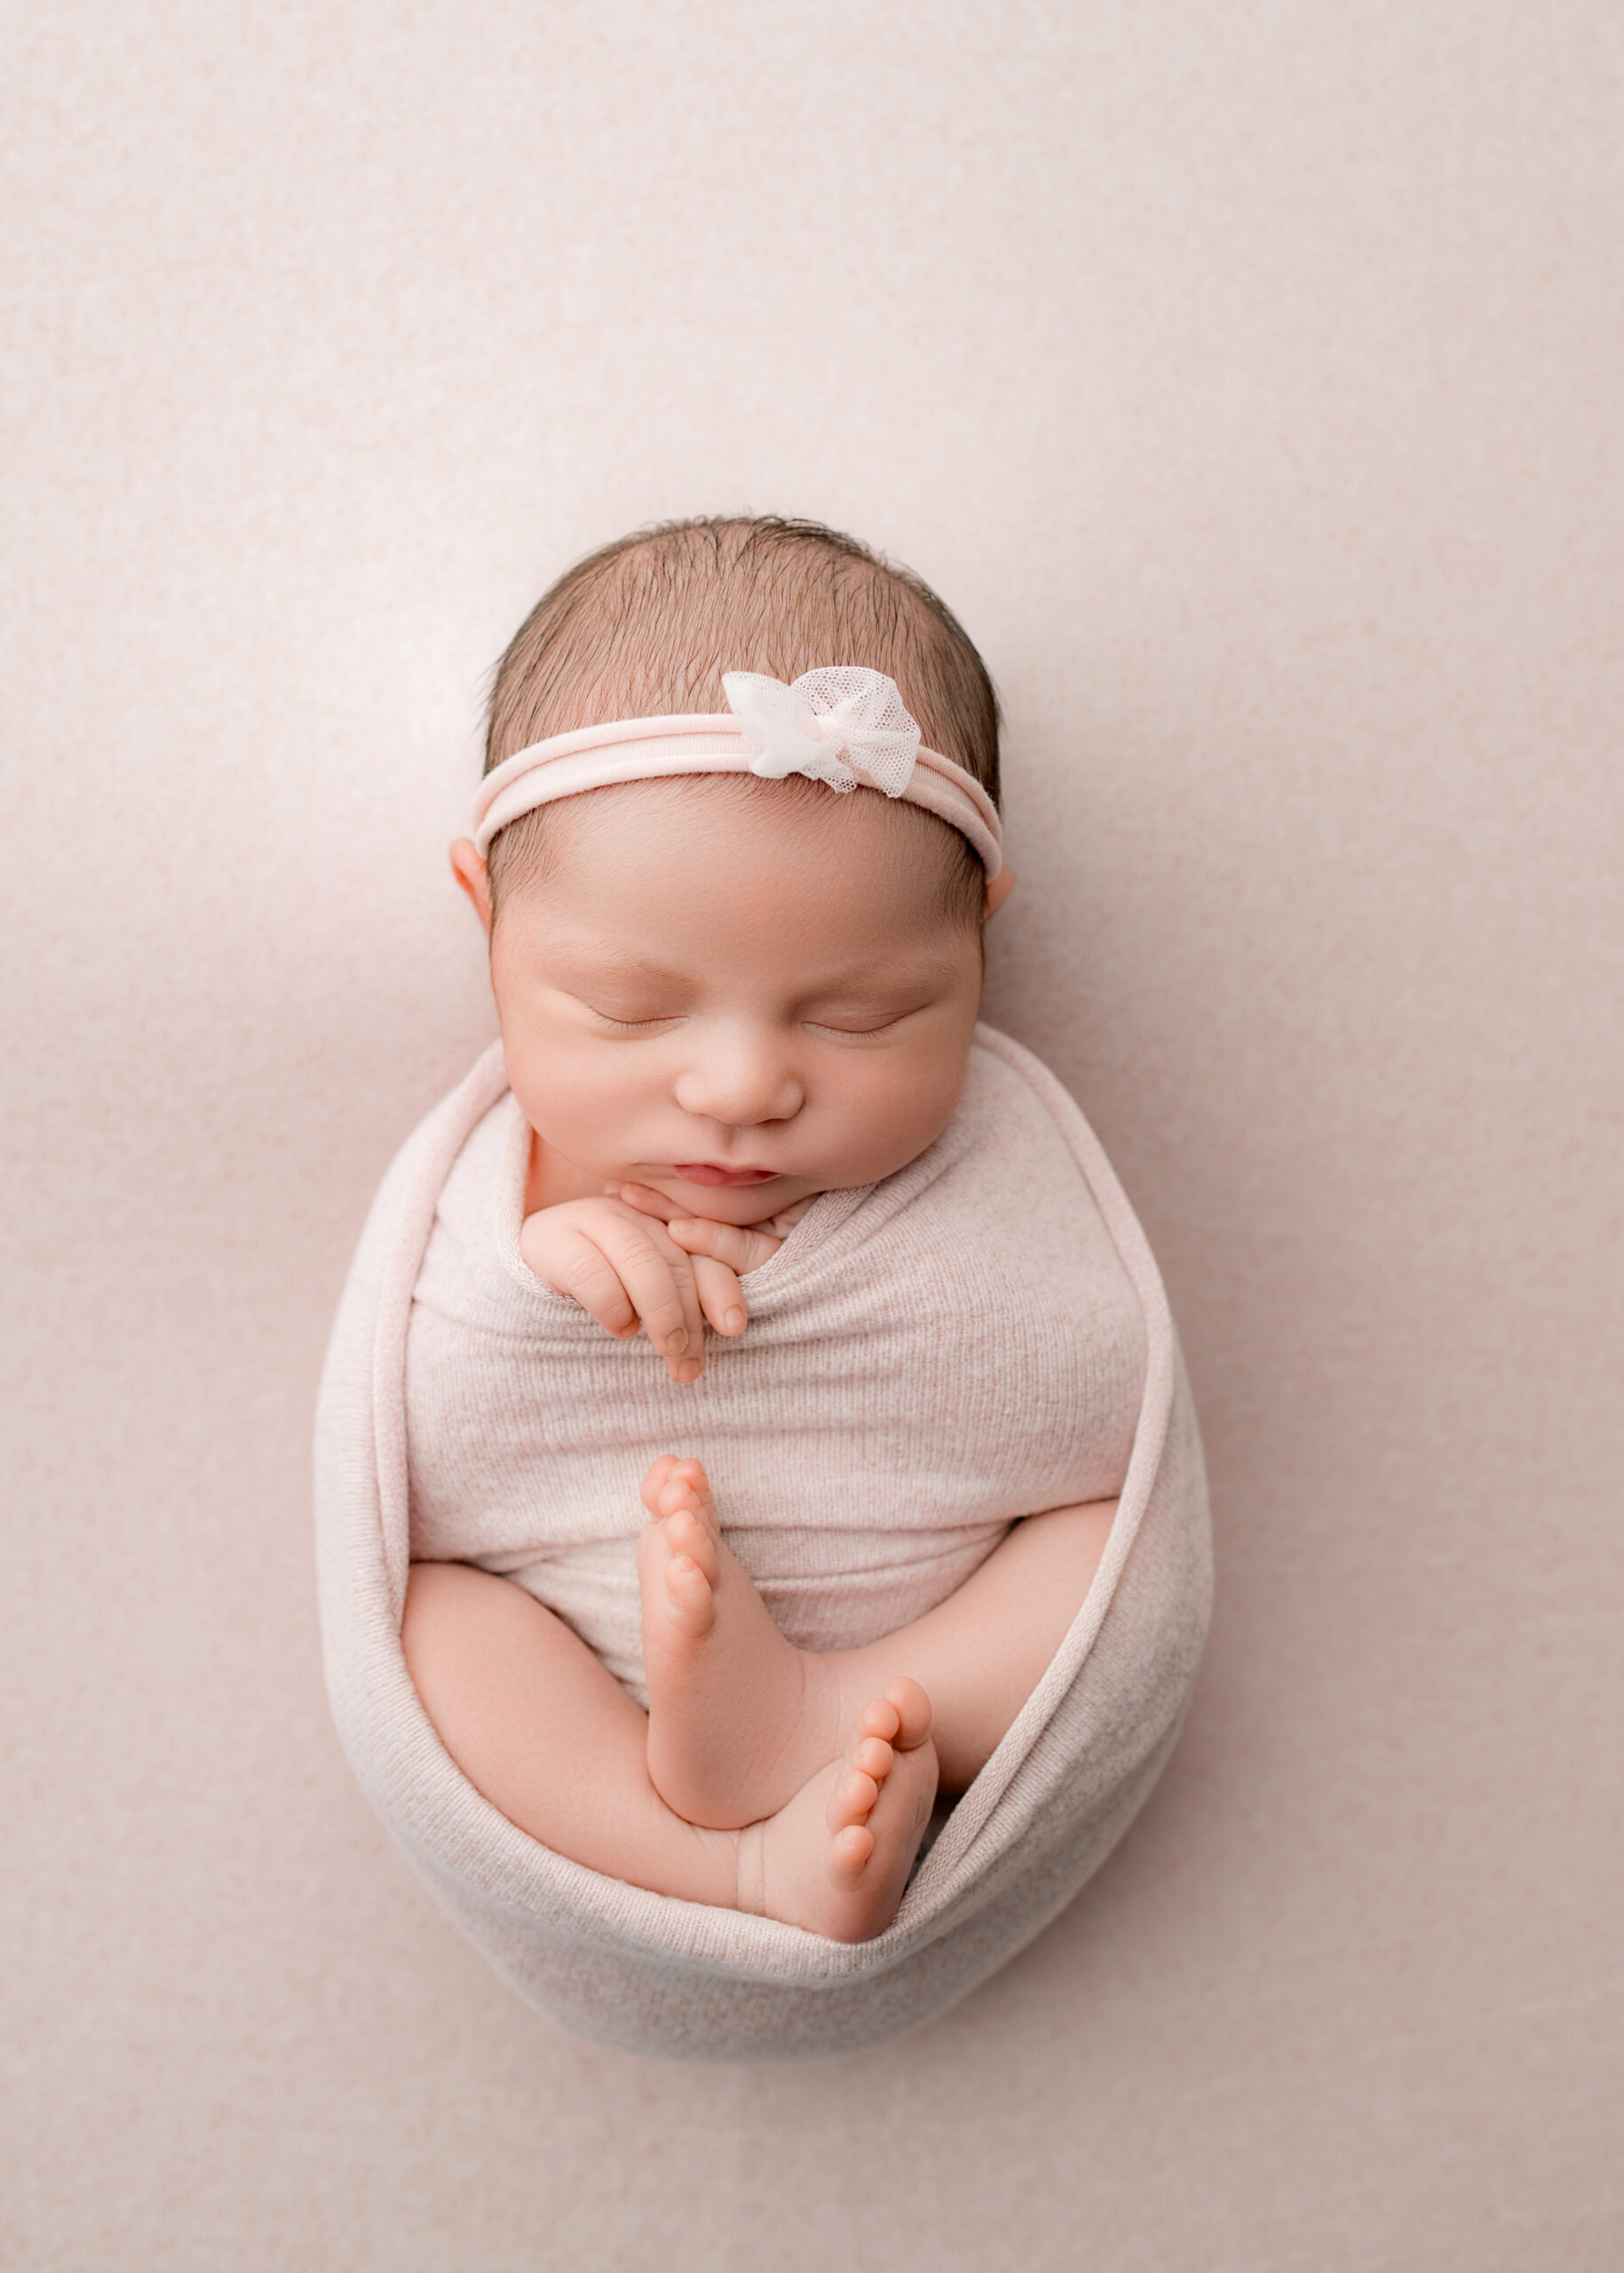 10 Questions You Should Ask Your Newborn Photographer